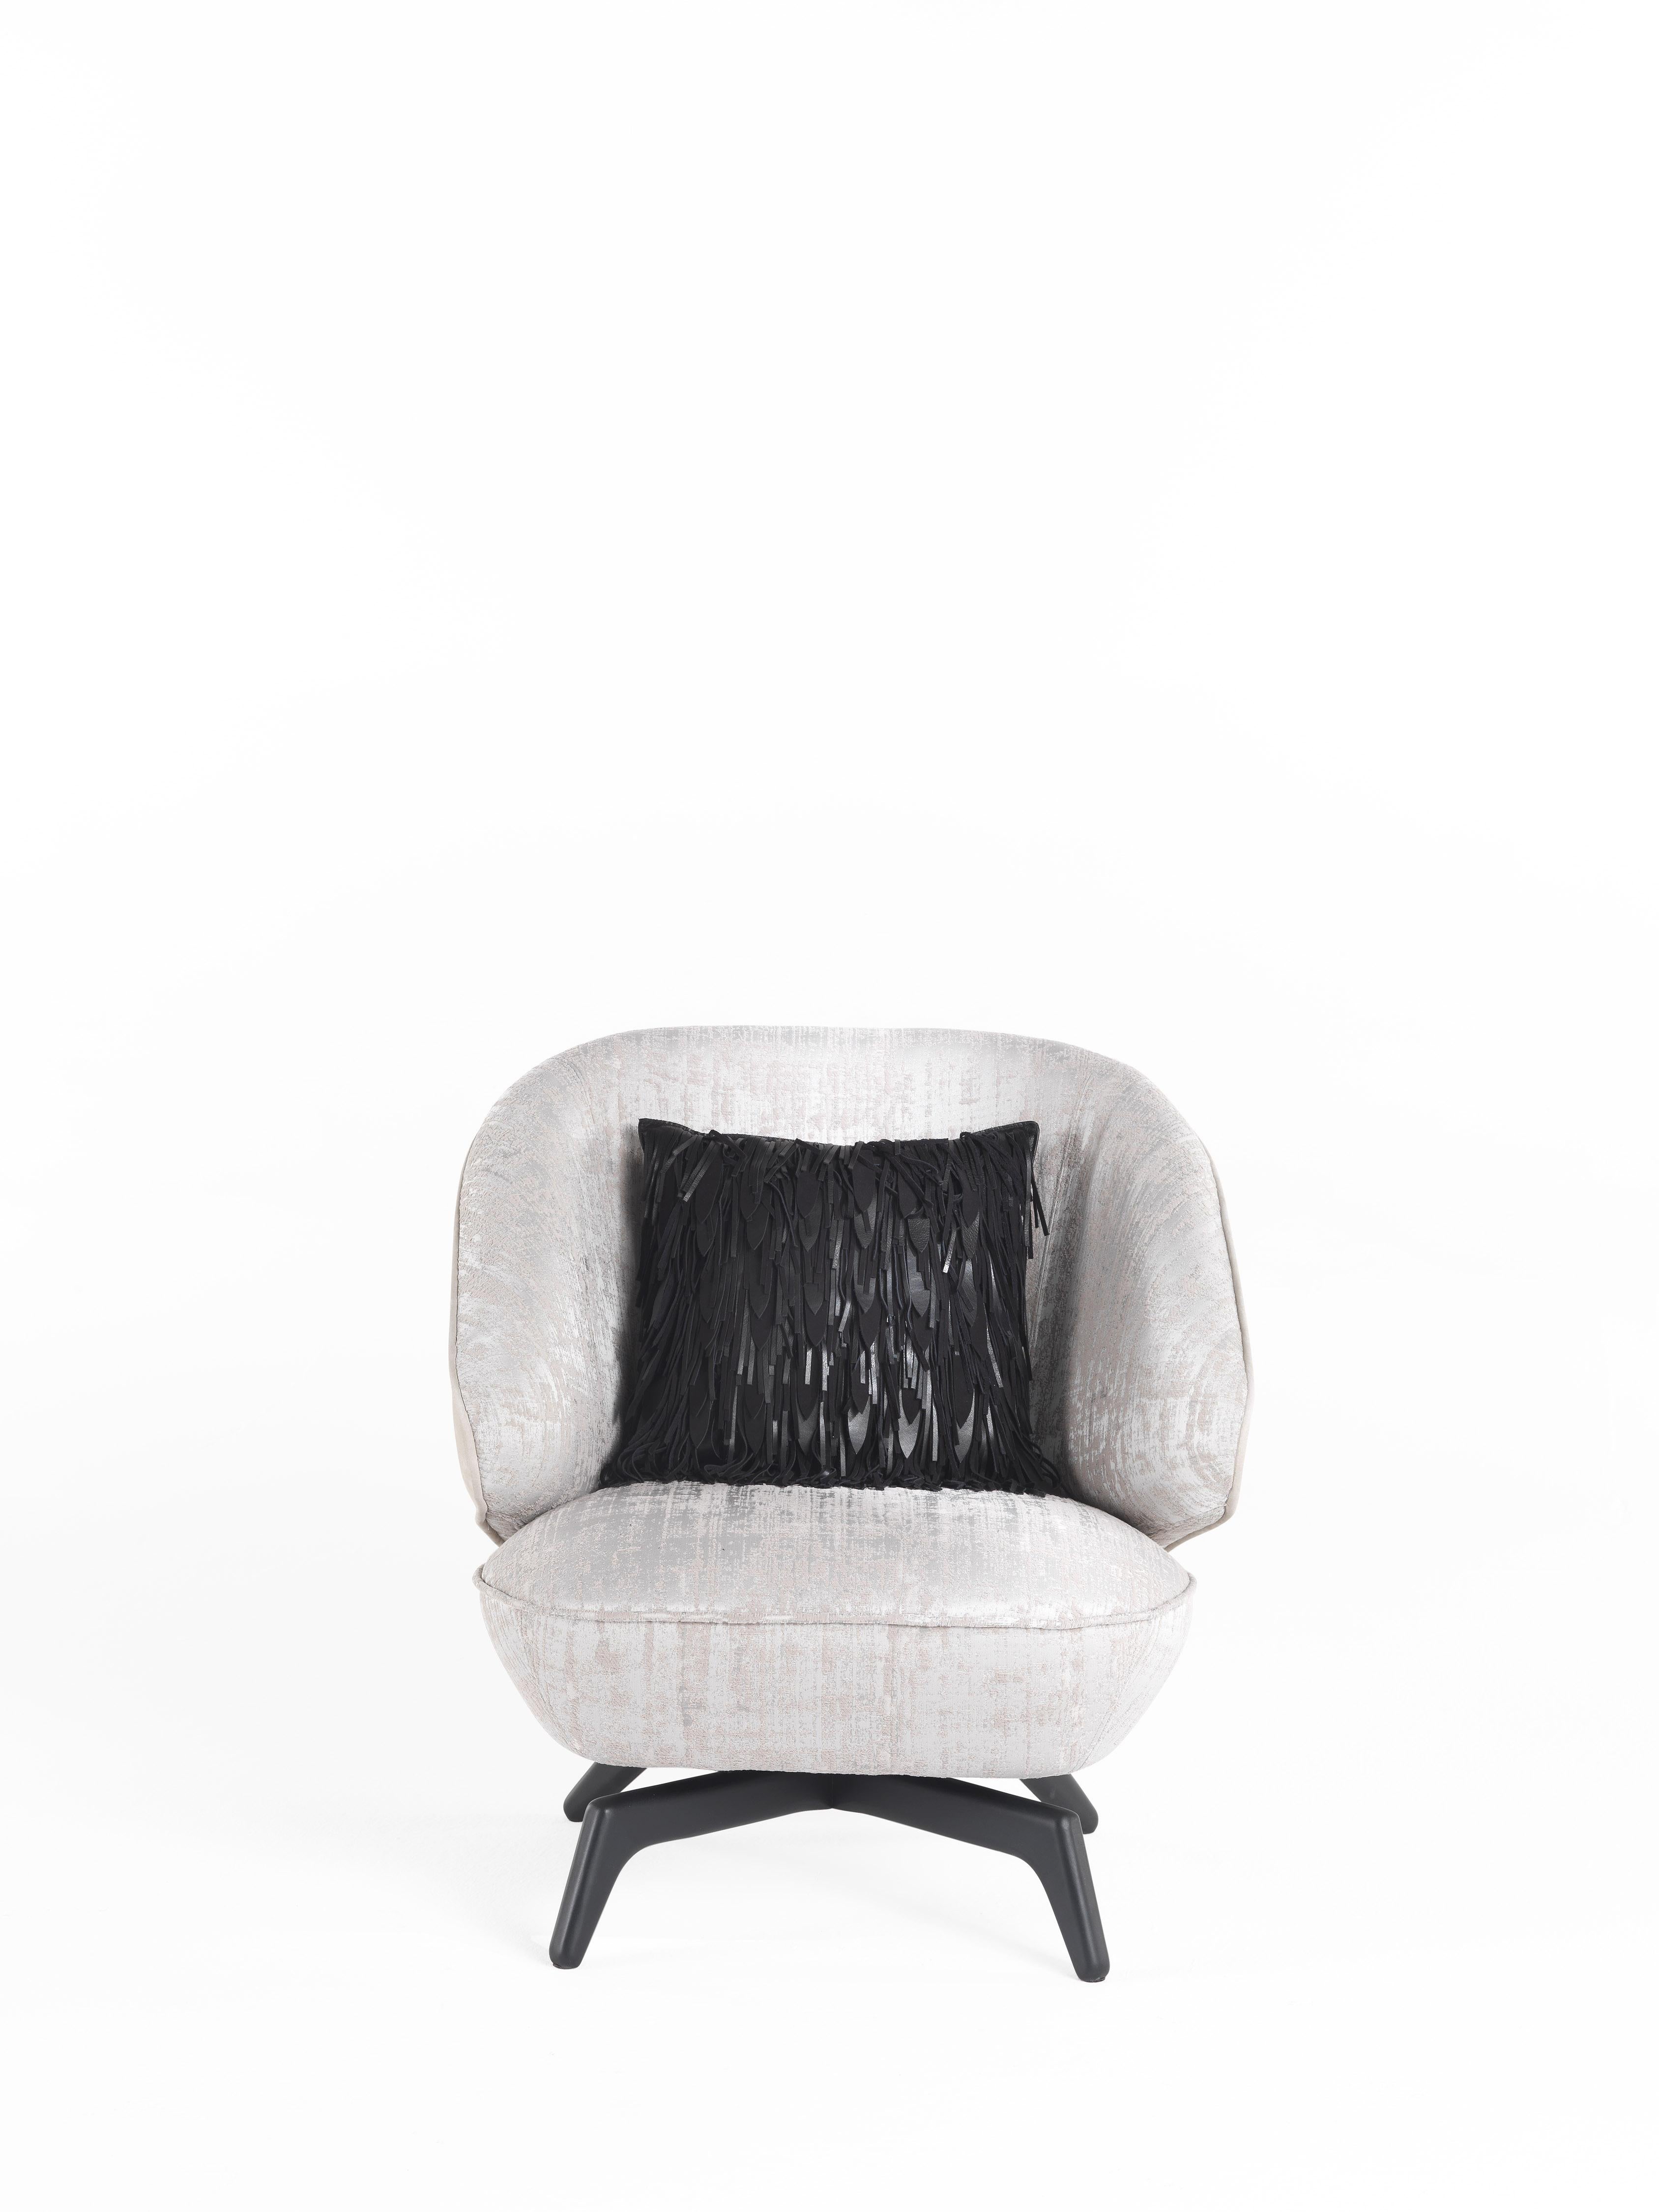 Modern 21st Century Key West Armchair in Jacquard by Roberto Cavalli Home Interiors  For Sale